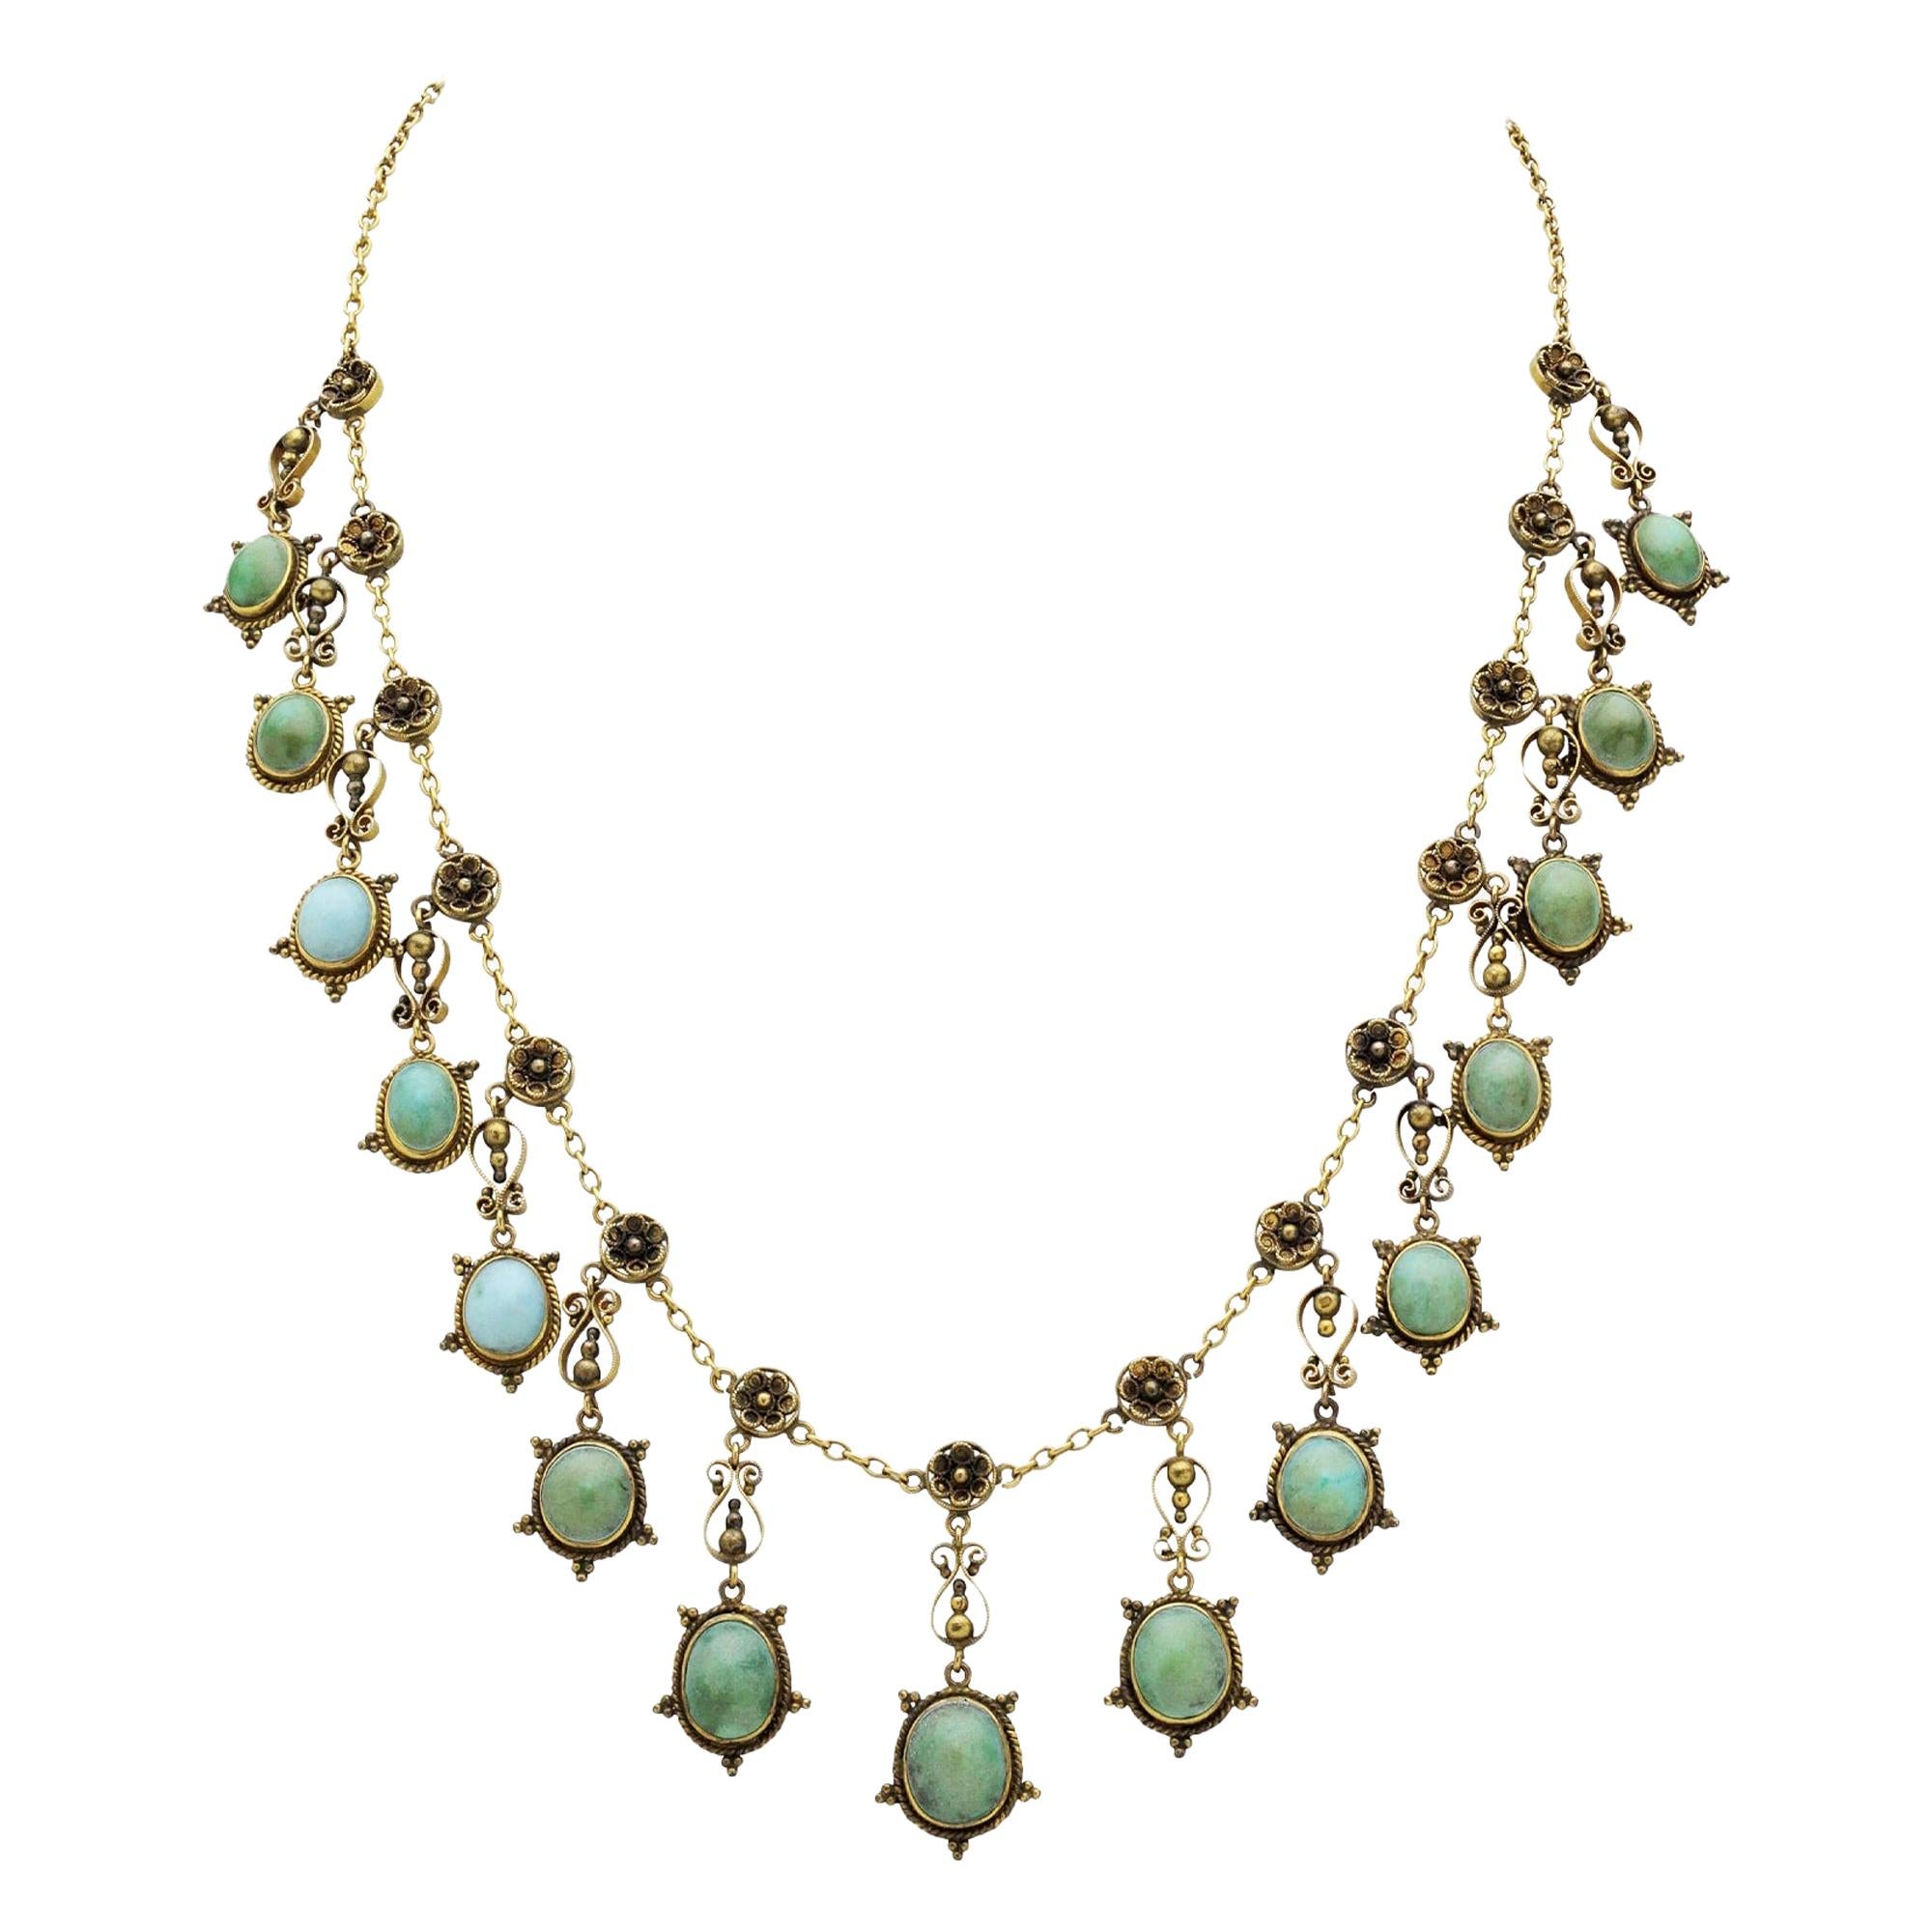 Victorian 14 Karat Gold and Turquoise Festoon Necklace